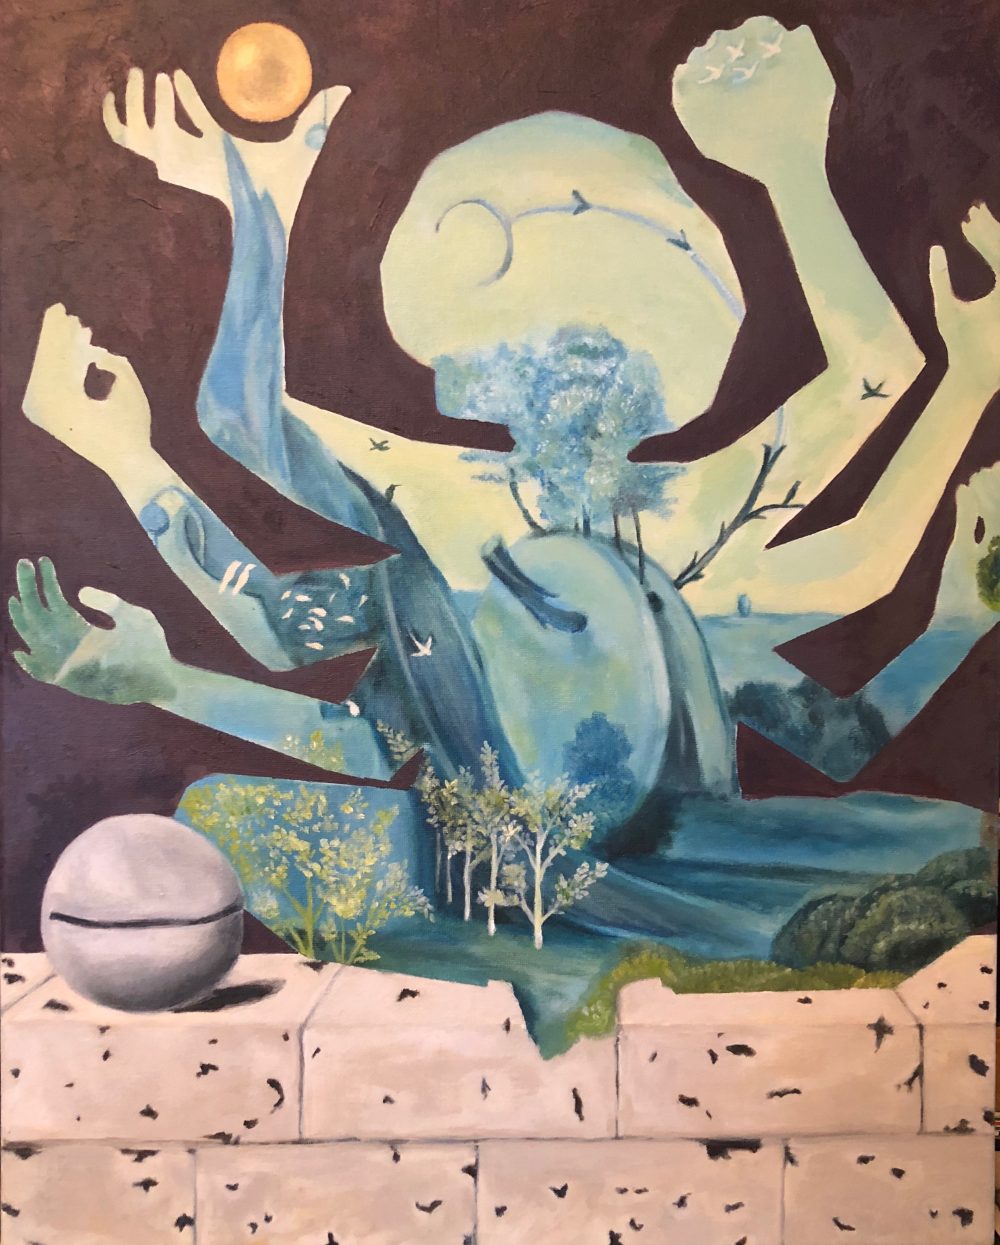 Cut out of a Hindu inspired figure version of Angela Davis meditating upon a wall made up of the garden of earthly delights by Hieronymus Bosch and the voice of space spherical bell to their side.